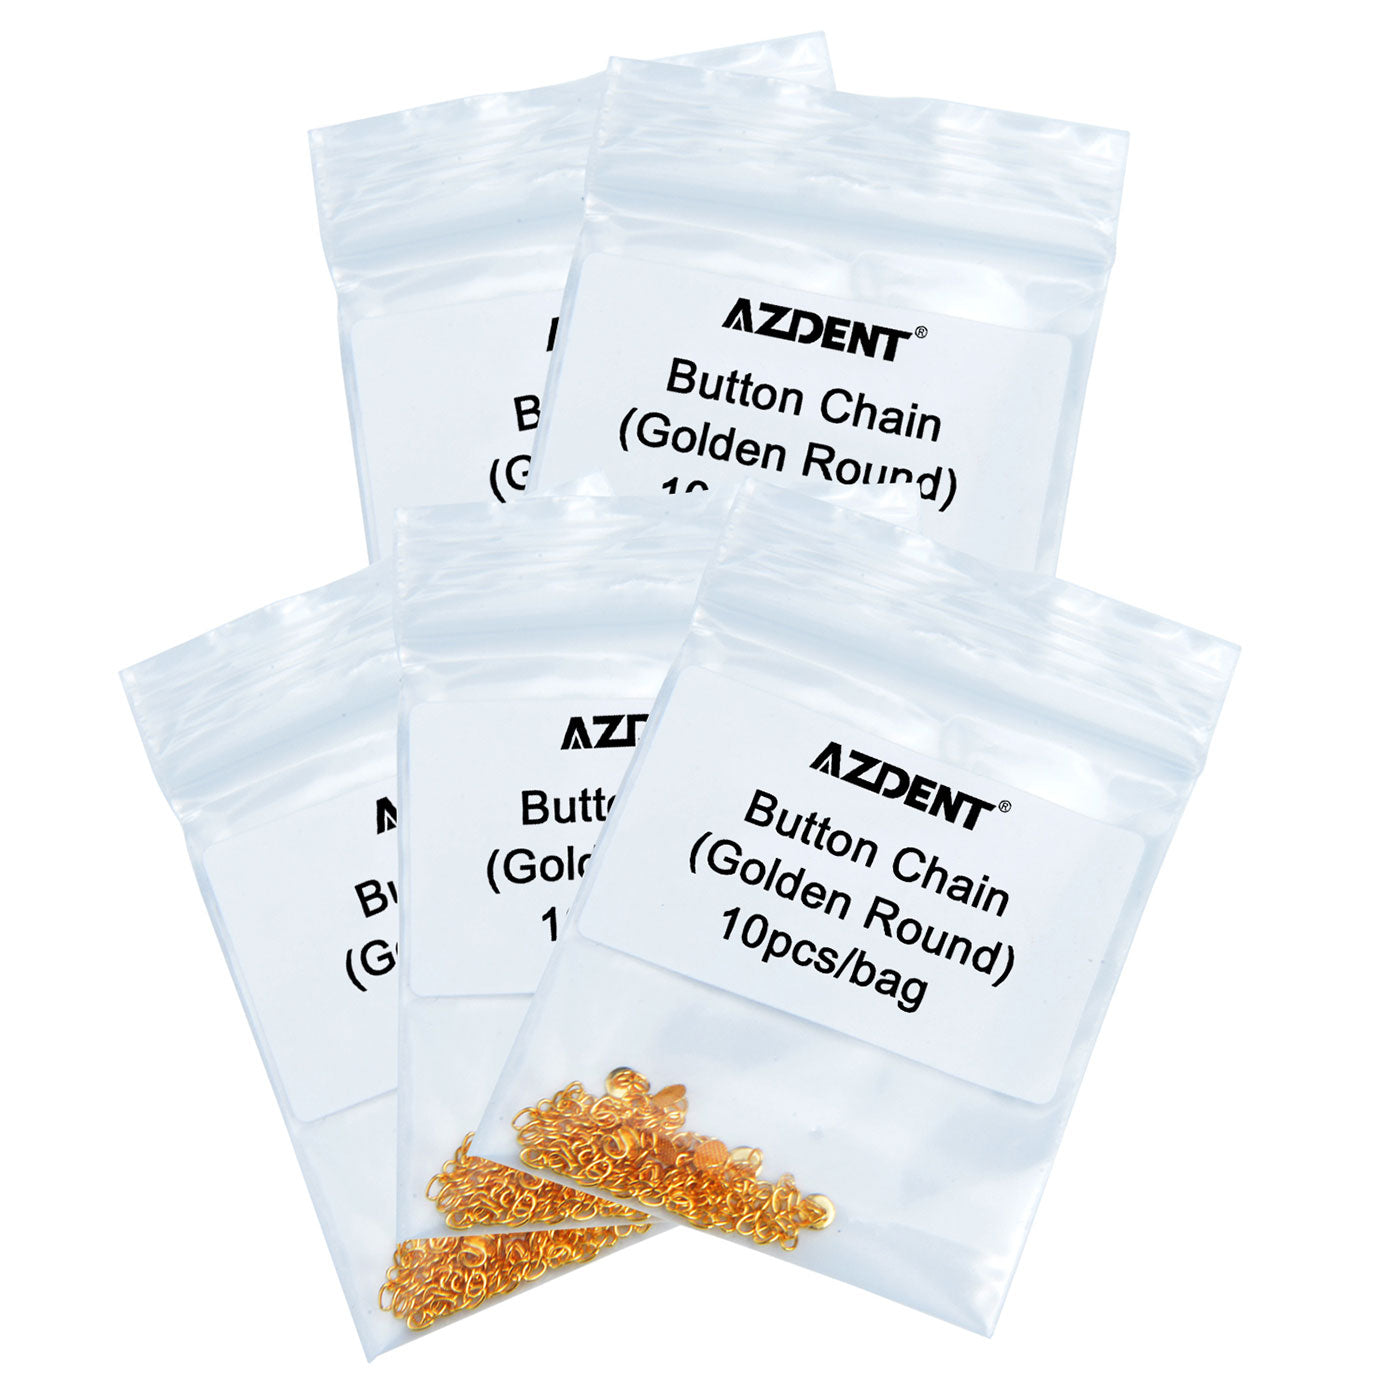 5 Bags AZDENT Dental Traction Chain Gold Plated Round Buttons with Chain 10pcs/Bag - azdentall.com